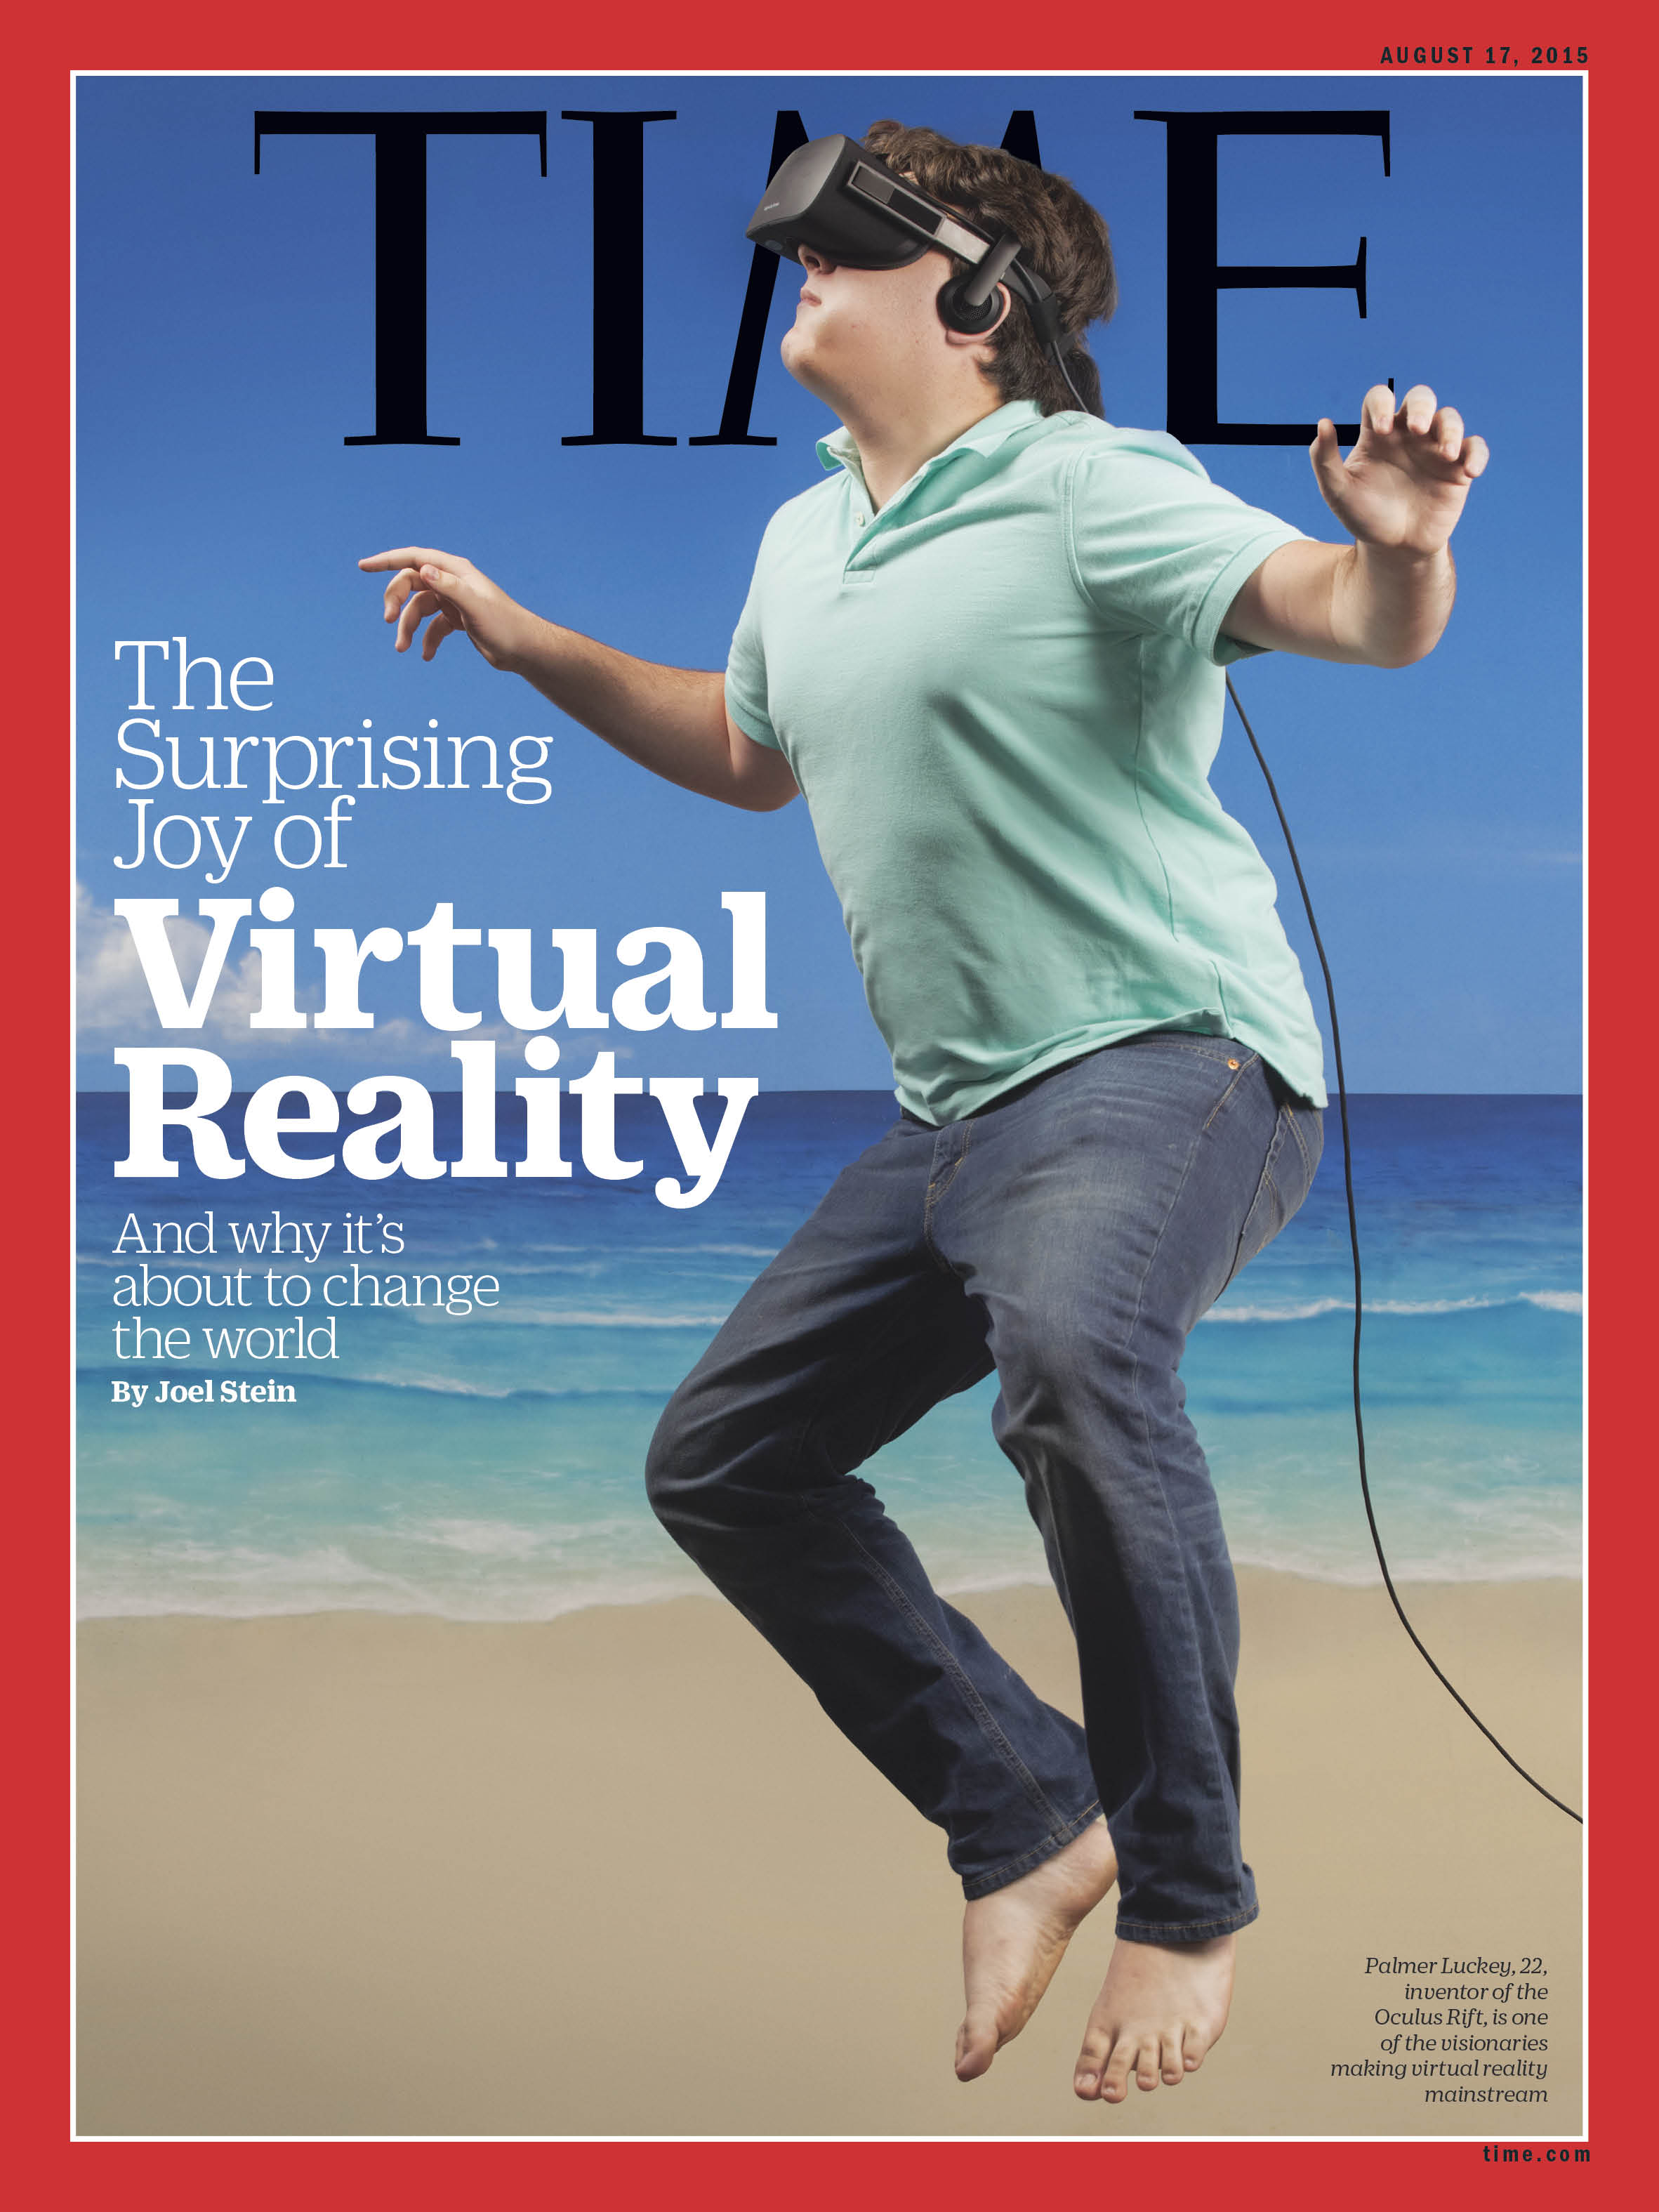 Palmer Luckey, 22, inventor of the Oculus Rift, is one of the visionaries making virtual reality mainstream (Photograph by Gregg Segal for TIME)